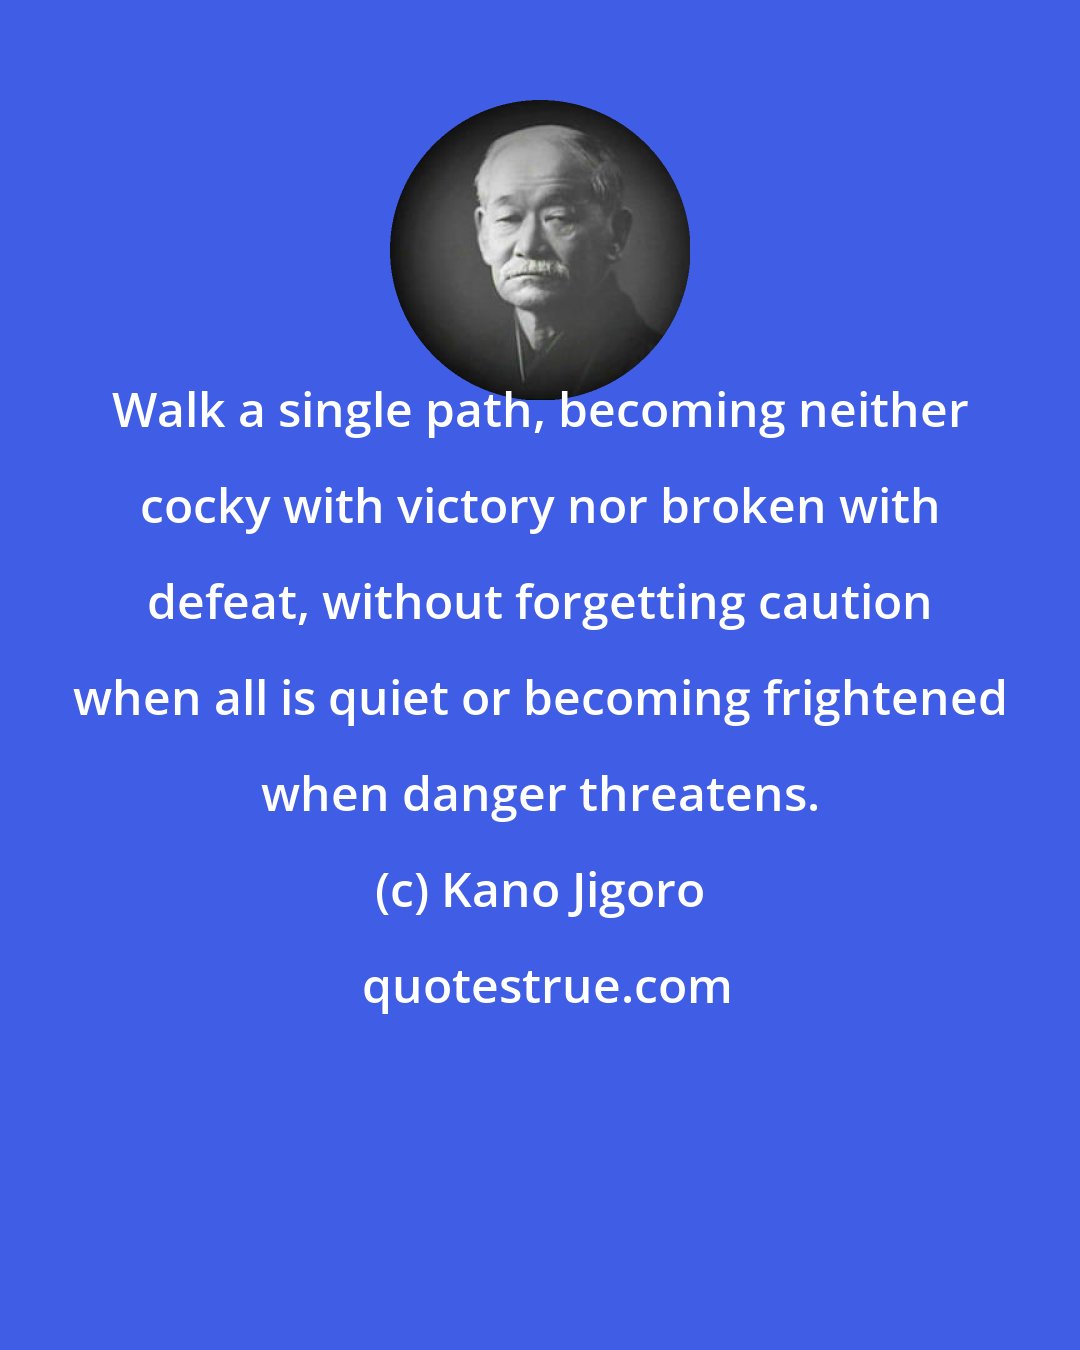 Kano Jigoro: Walk a single path, becoming neither cocky with victory nor broken with defeat, without forgetting caution when all is quiet or becoming frightened when danger threatens.